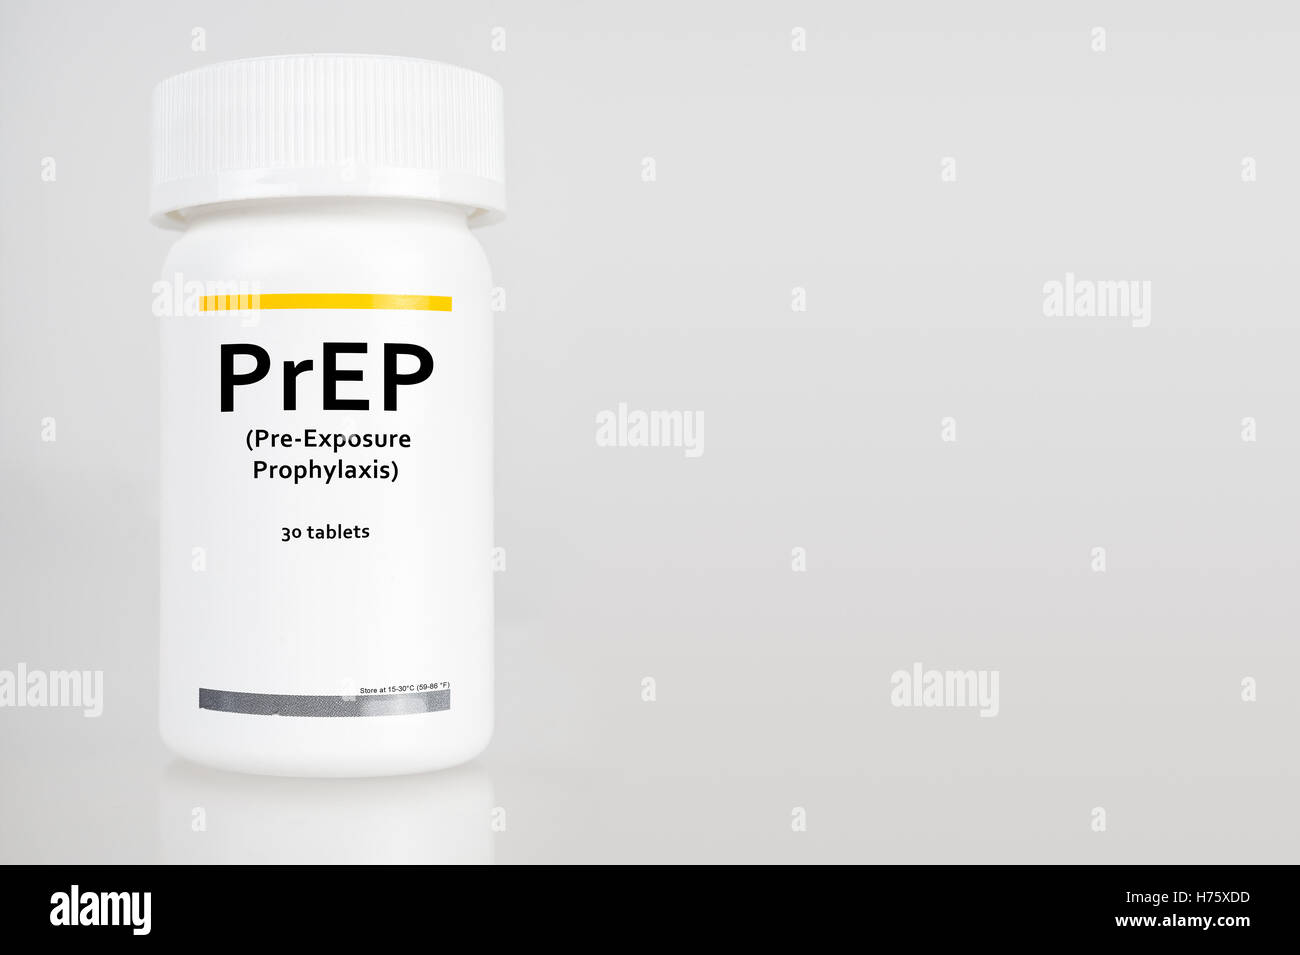 Pill Bottle with label 'PrEP' (stands for Pre-Exposure Prophylaxis). PreP treatment is used to prevent HIV infection Stock Photo